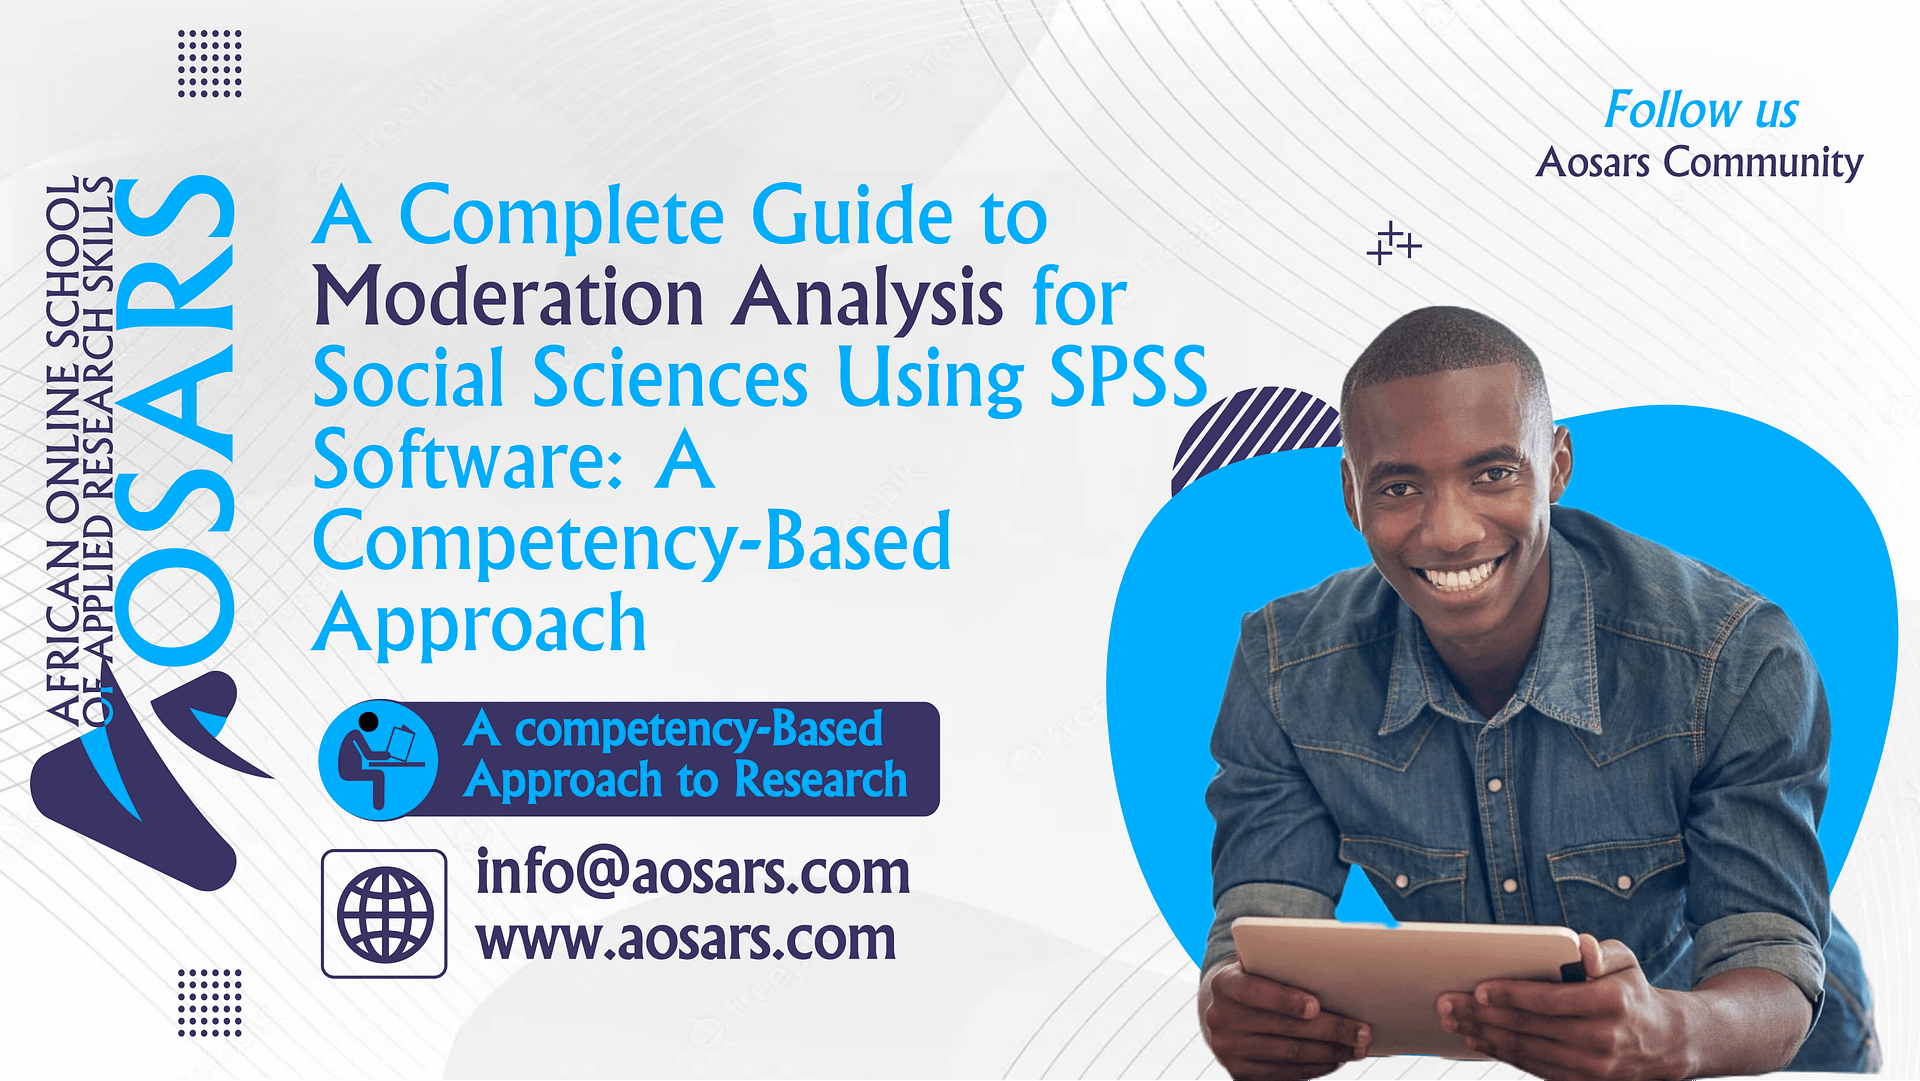 A Complete Guide to Moderation Analysis for Social Sciences Using SPSS Software: A Competency-Based Approach